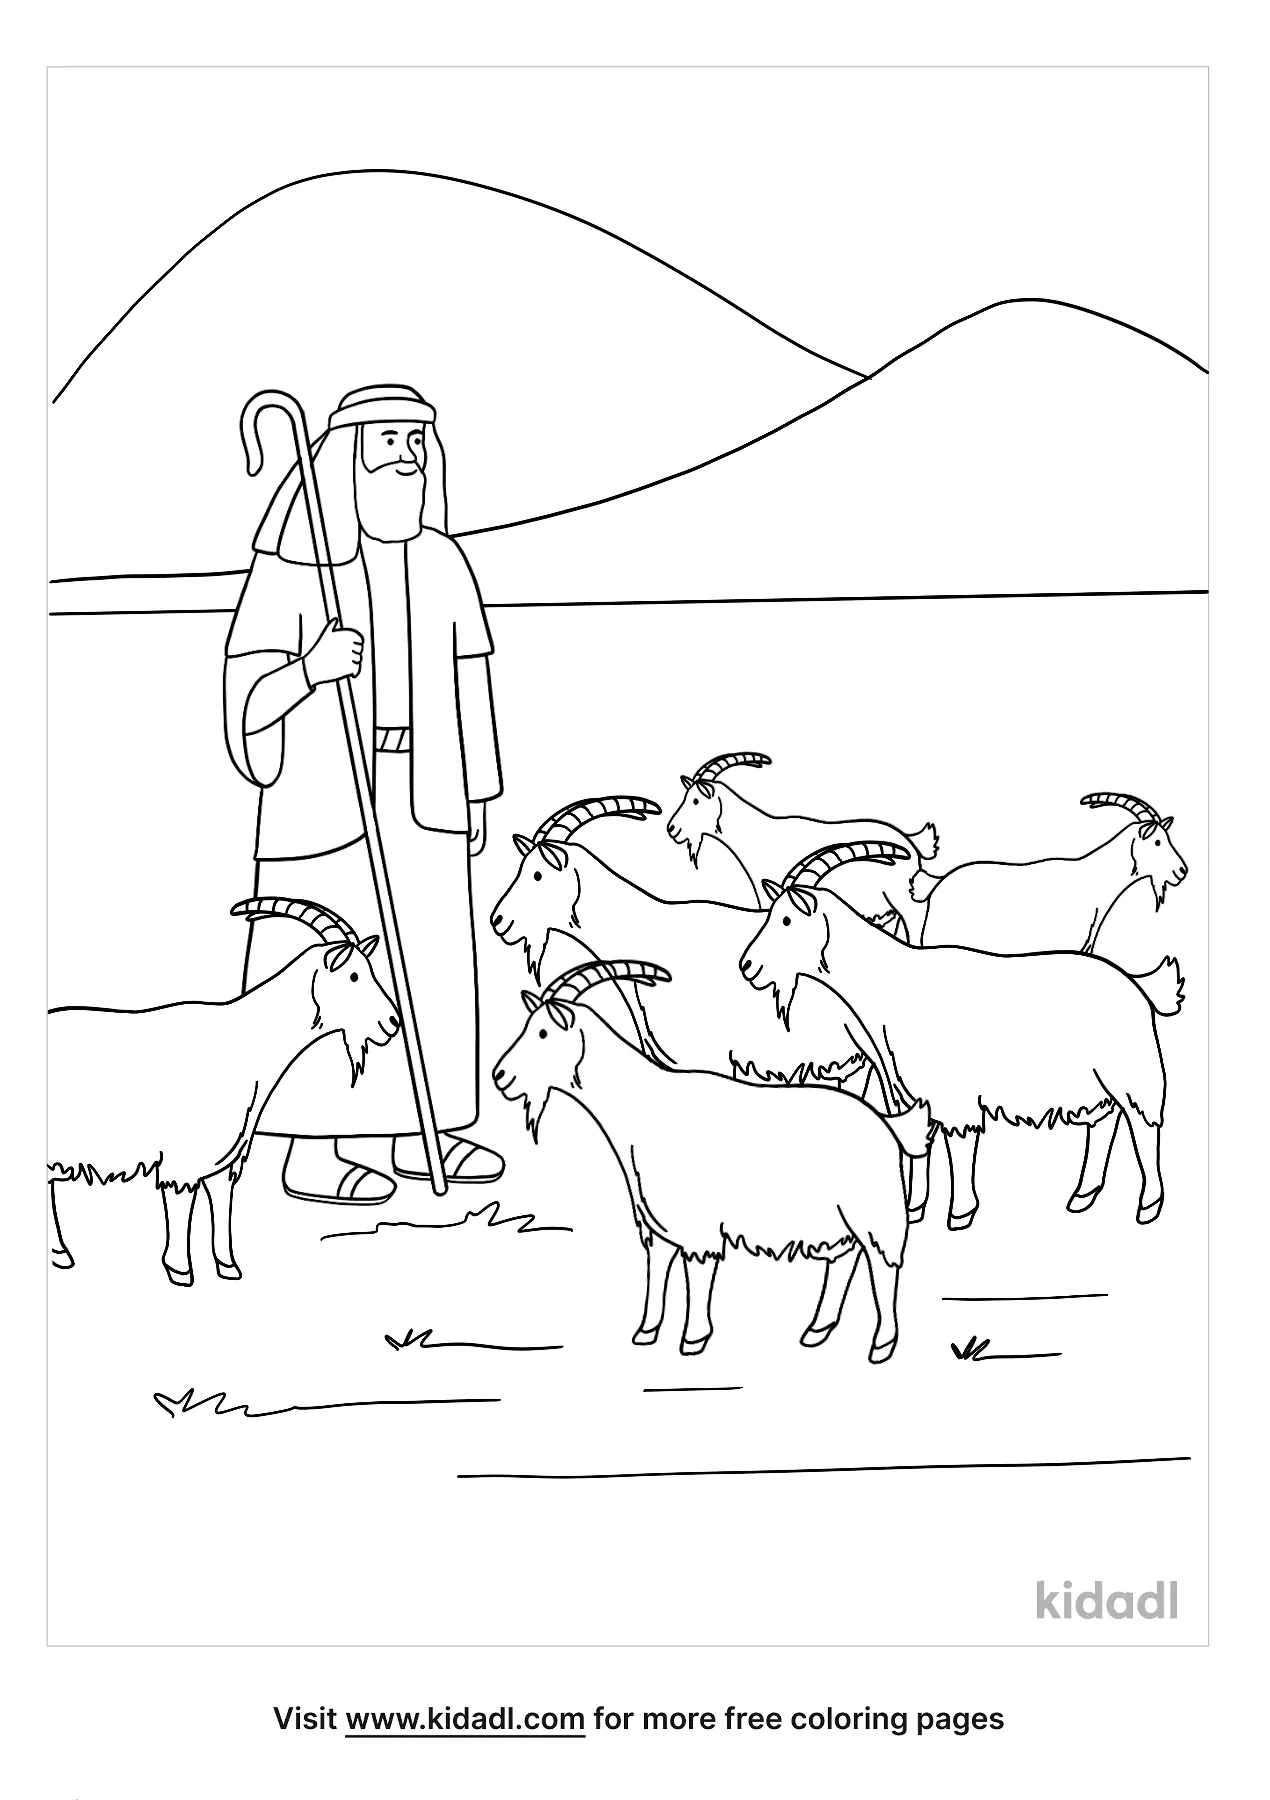 Shepherd With Goats Coloring Page